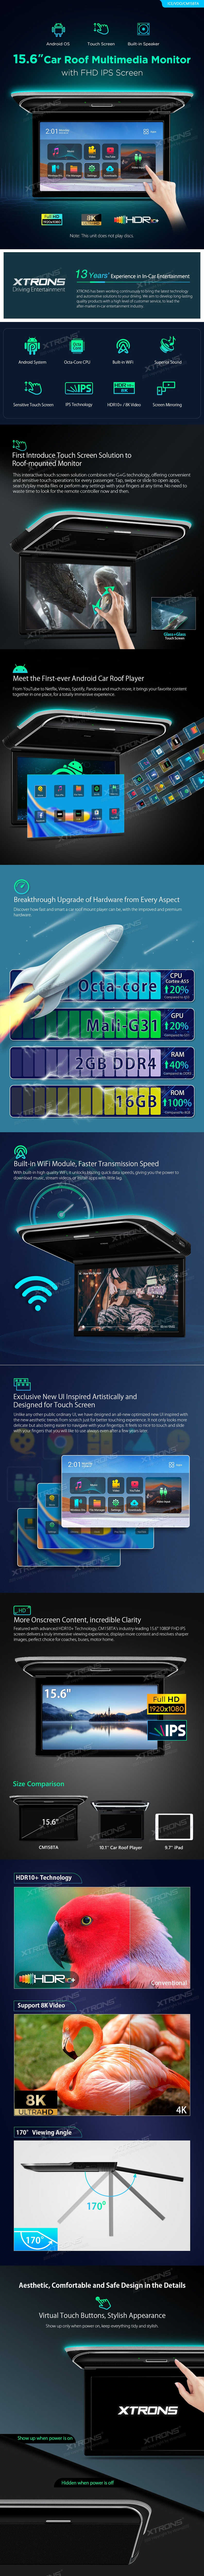 15 inch roof multimedia monitor